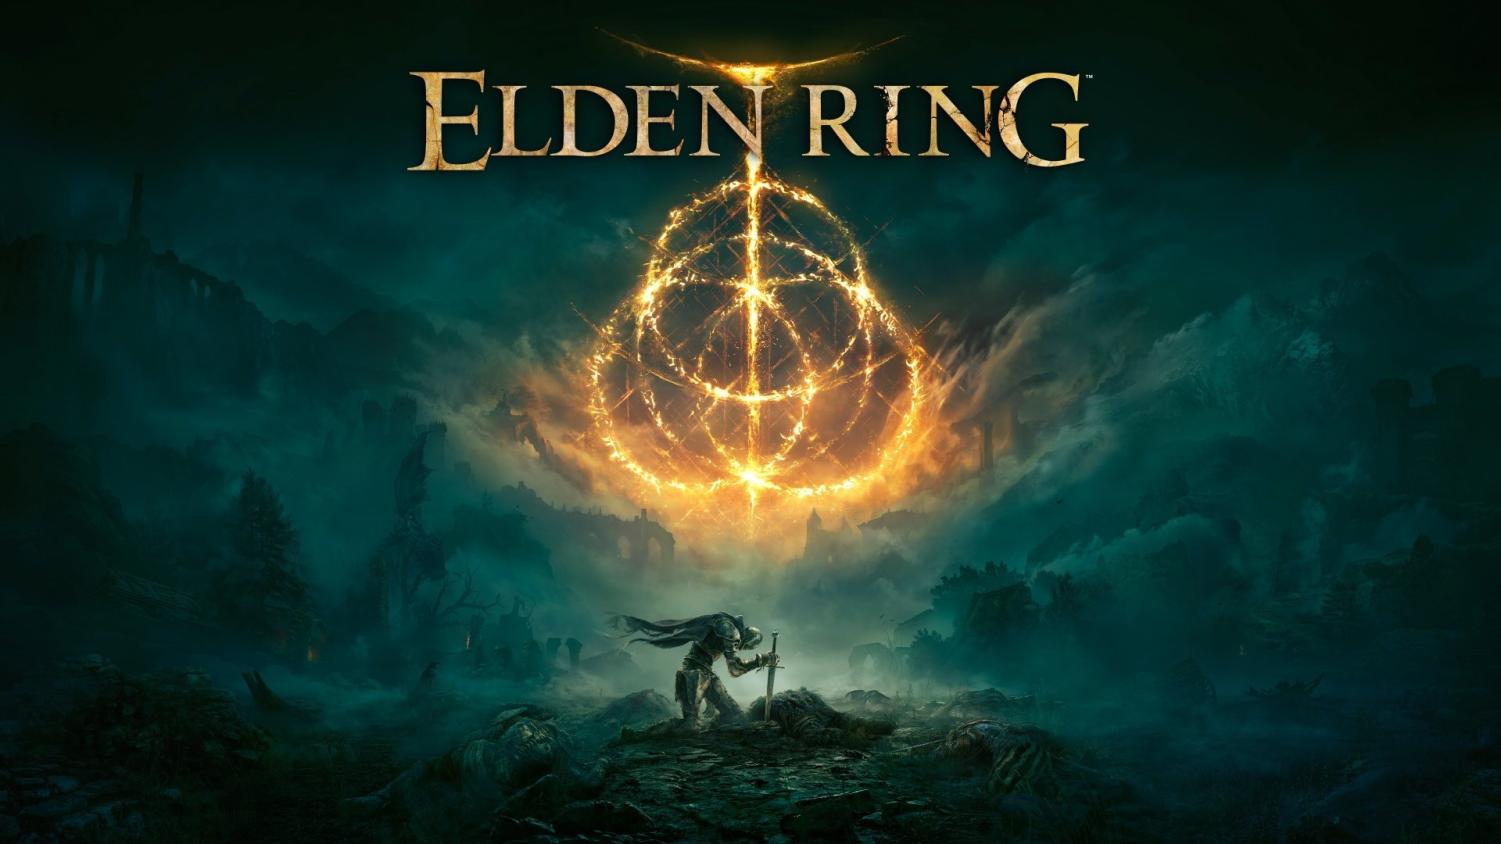 Elden Ring and nearly all of FromSoftware's titles have been